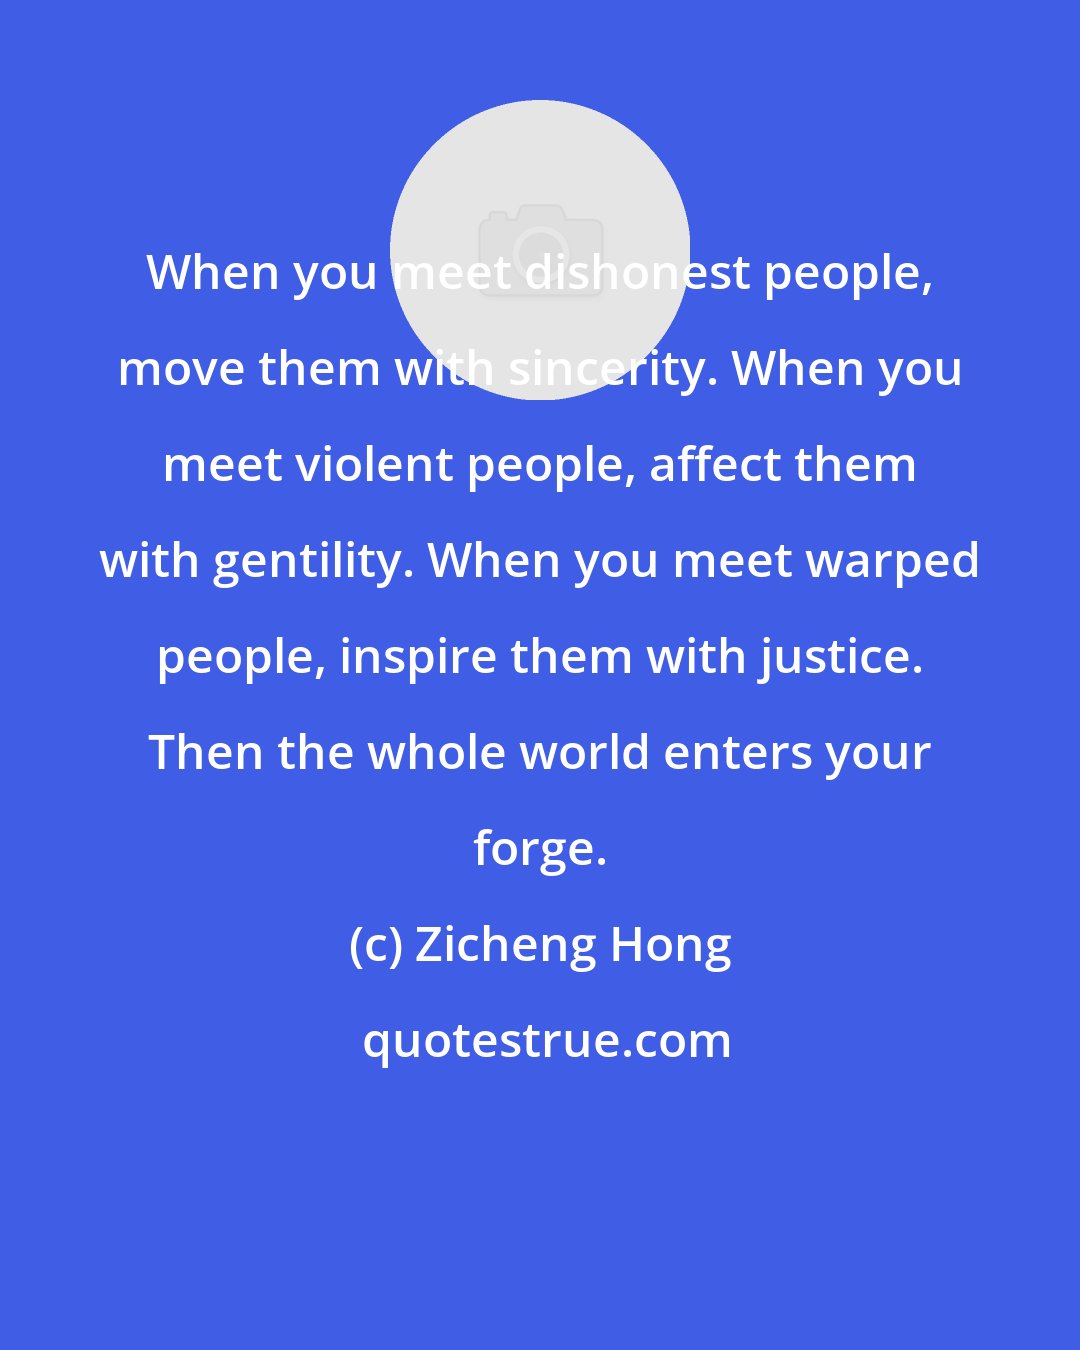 Zicheng Hong: When you meet dishonest people, move them with sincerity. When you meet violent people, affect them with gentility. When you meet warped people, inspire them with justice. Then the whole world enters your forge.